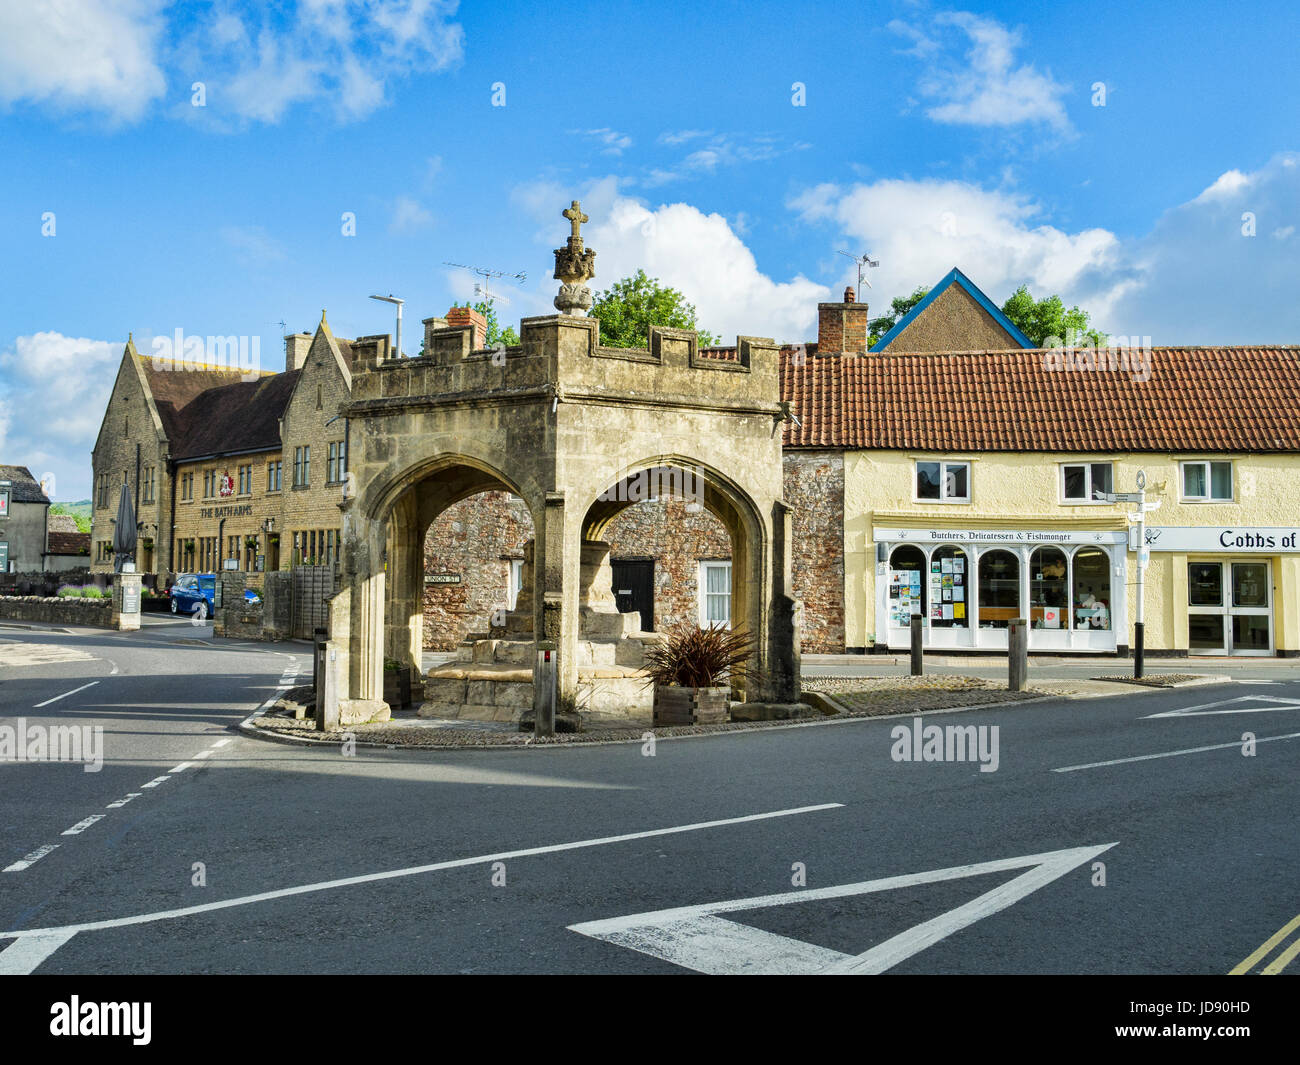 7 June 2017: Cheddar, Somerset, UK - The centre of the village of Cheddar, with the Market Cross. Stock Photo